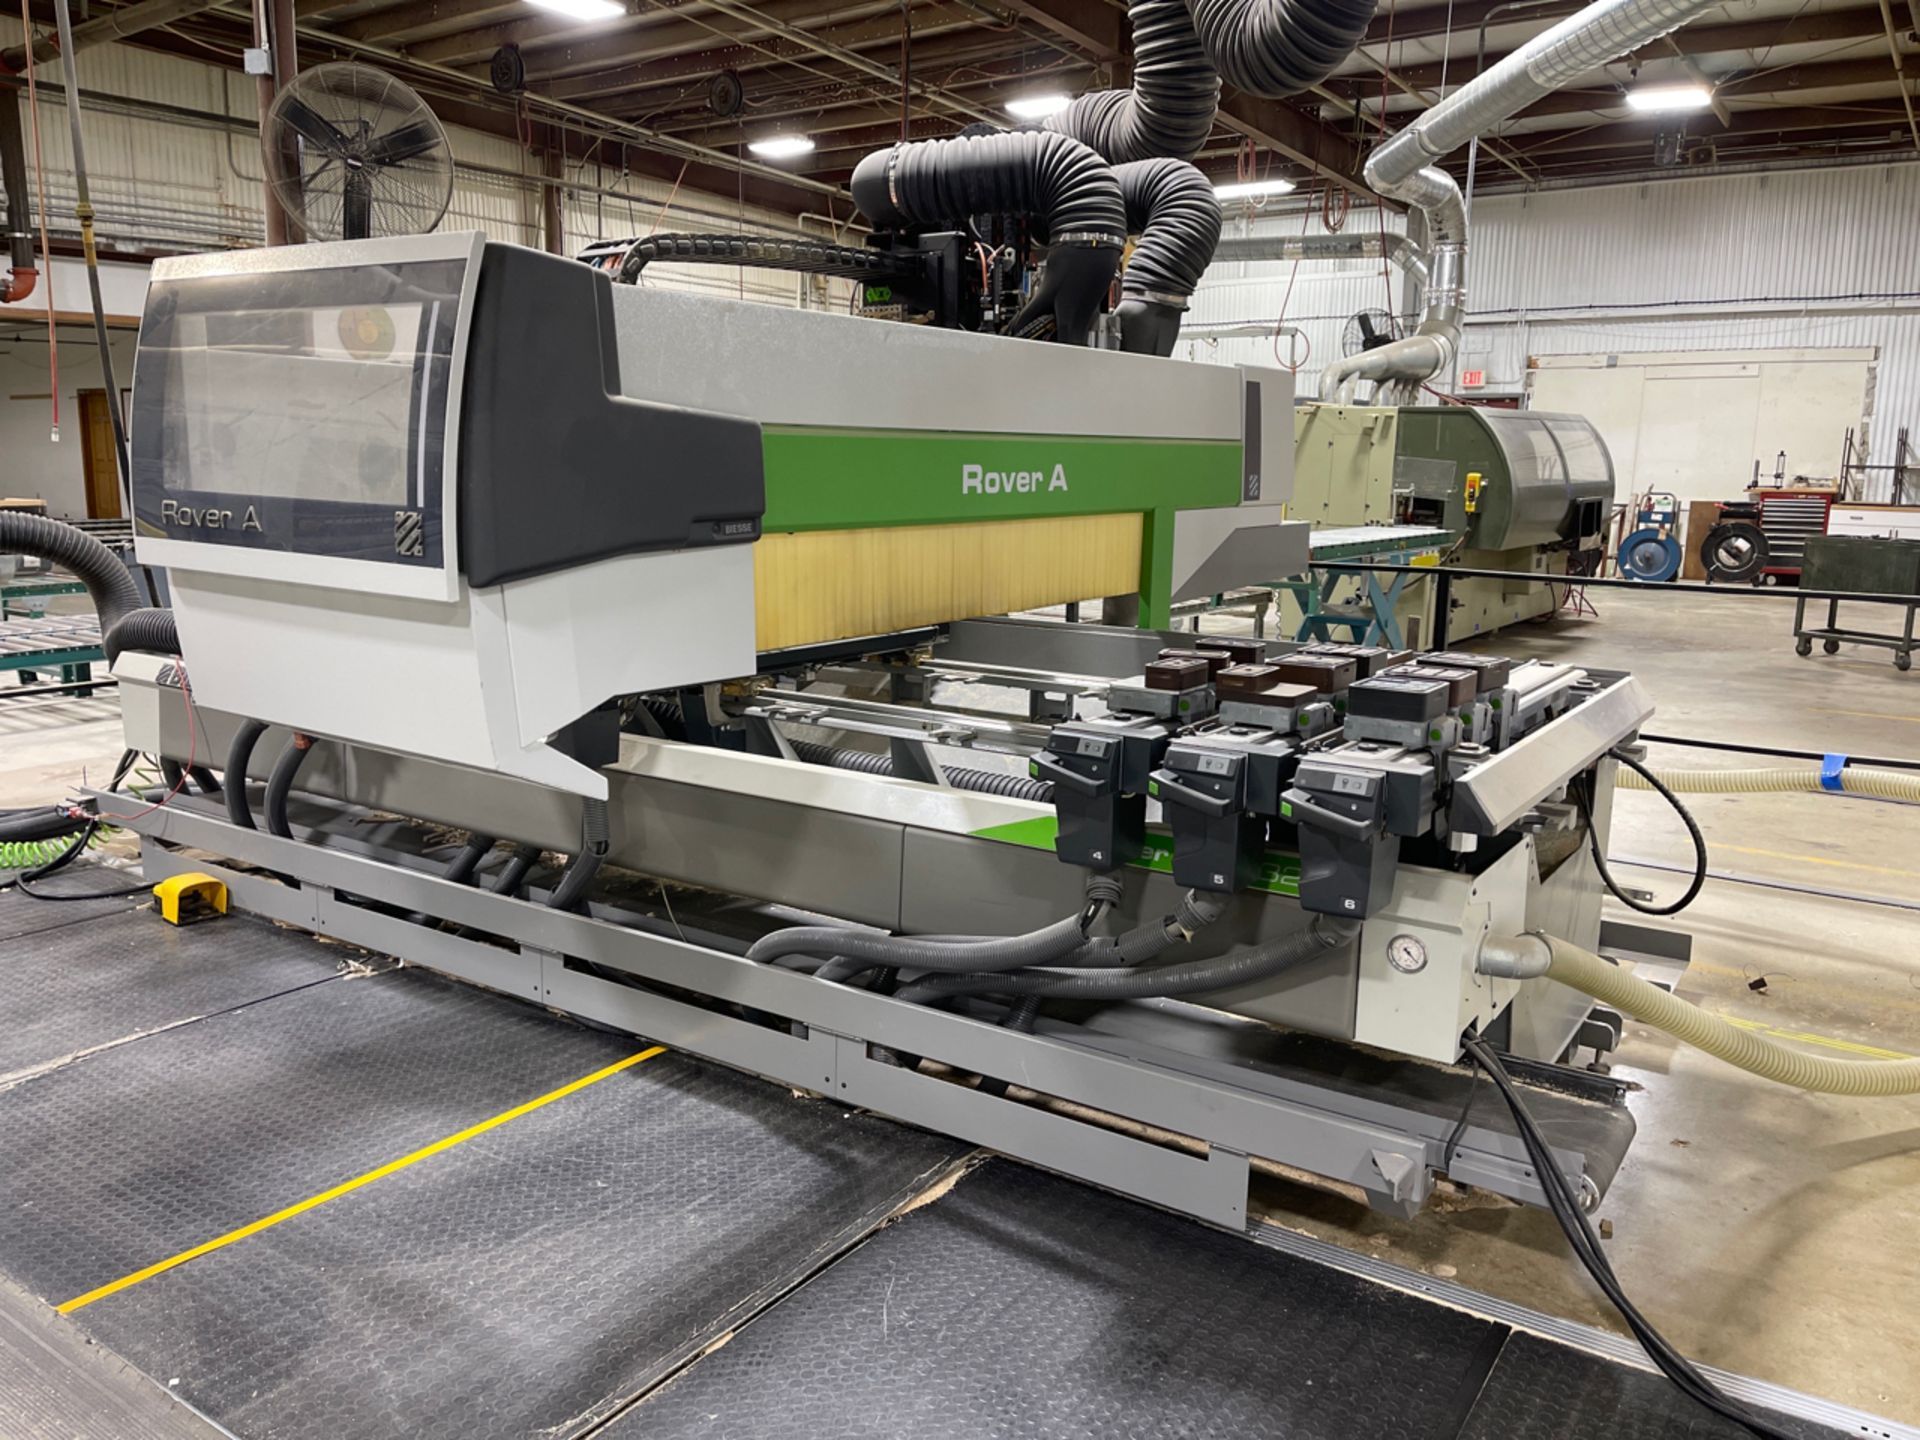 Biesse Rover A 1332 ATS Pod and Rail 4-Axis CNC Router, S/N 35171, New 2012 - Image 6 of 16